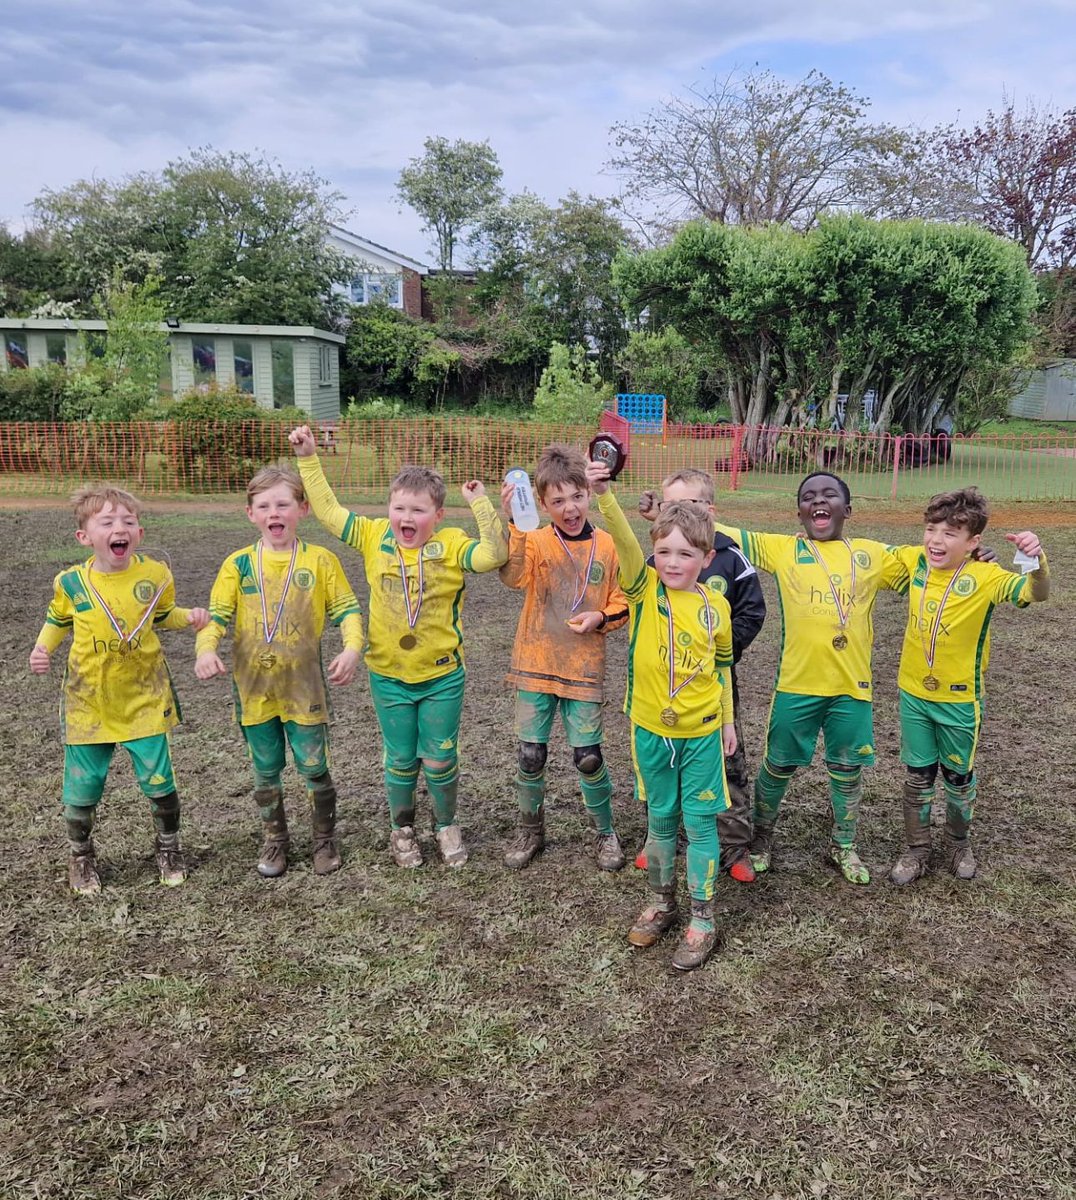 Well done to our U7 Greens on winning the shield at a very muddy Didcot Dynamos tournament on Sunday!